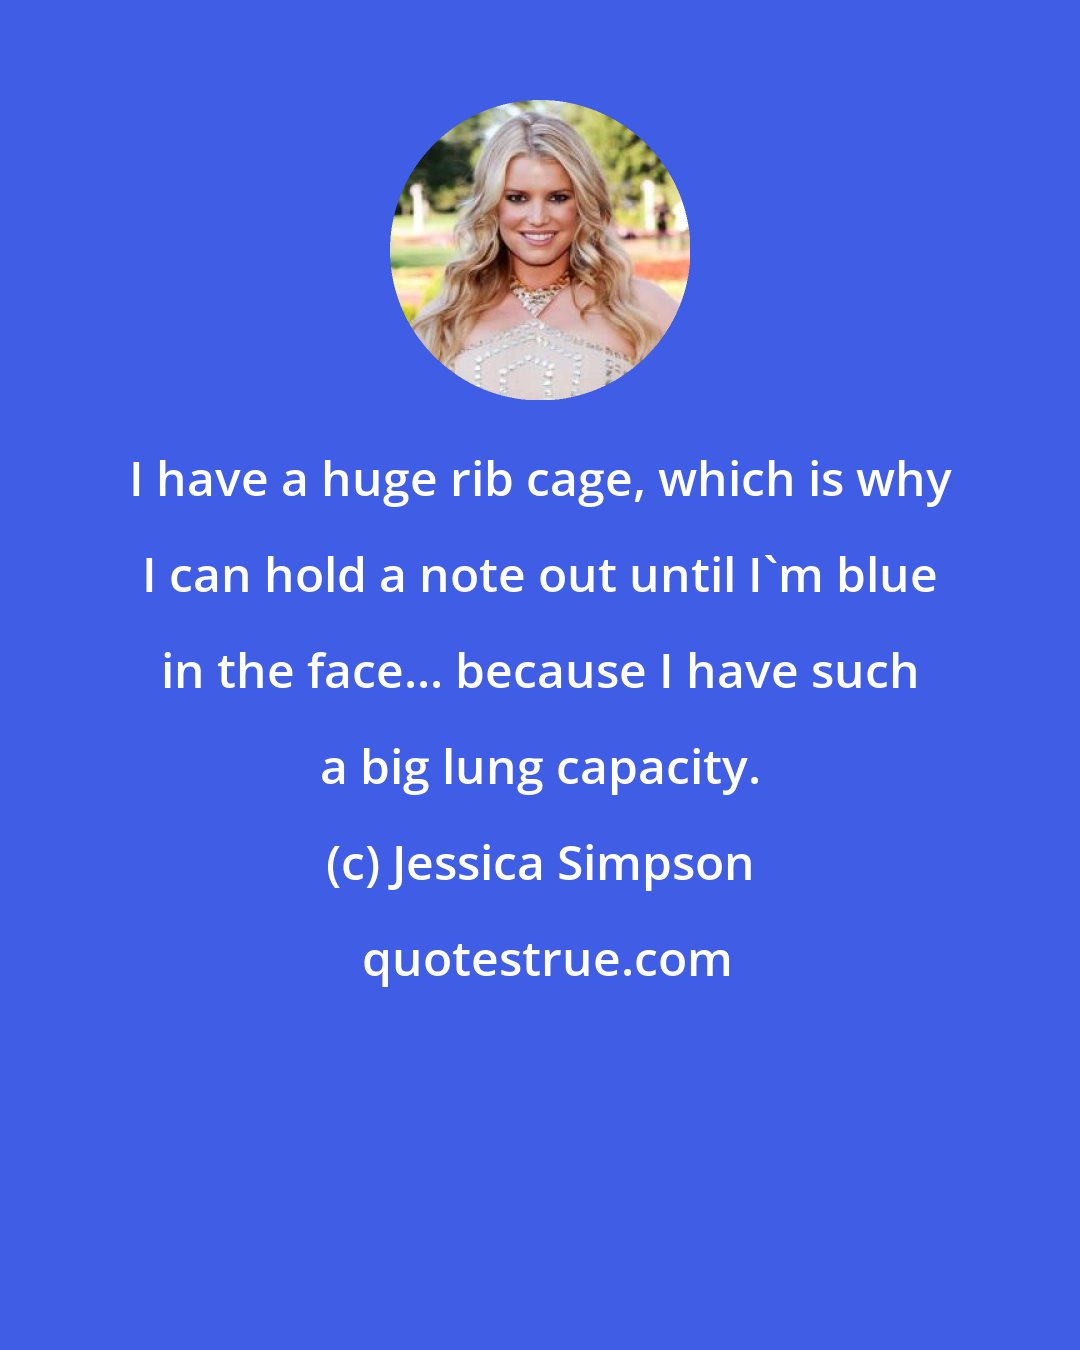 Jessica Simpson: I have a huge rib cage, which is why I can hold a note out until I'm blue in the face... because I have such a big lung capacity.